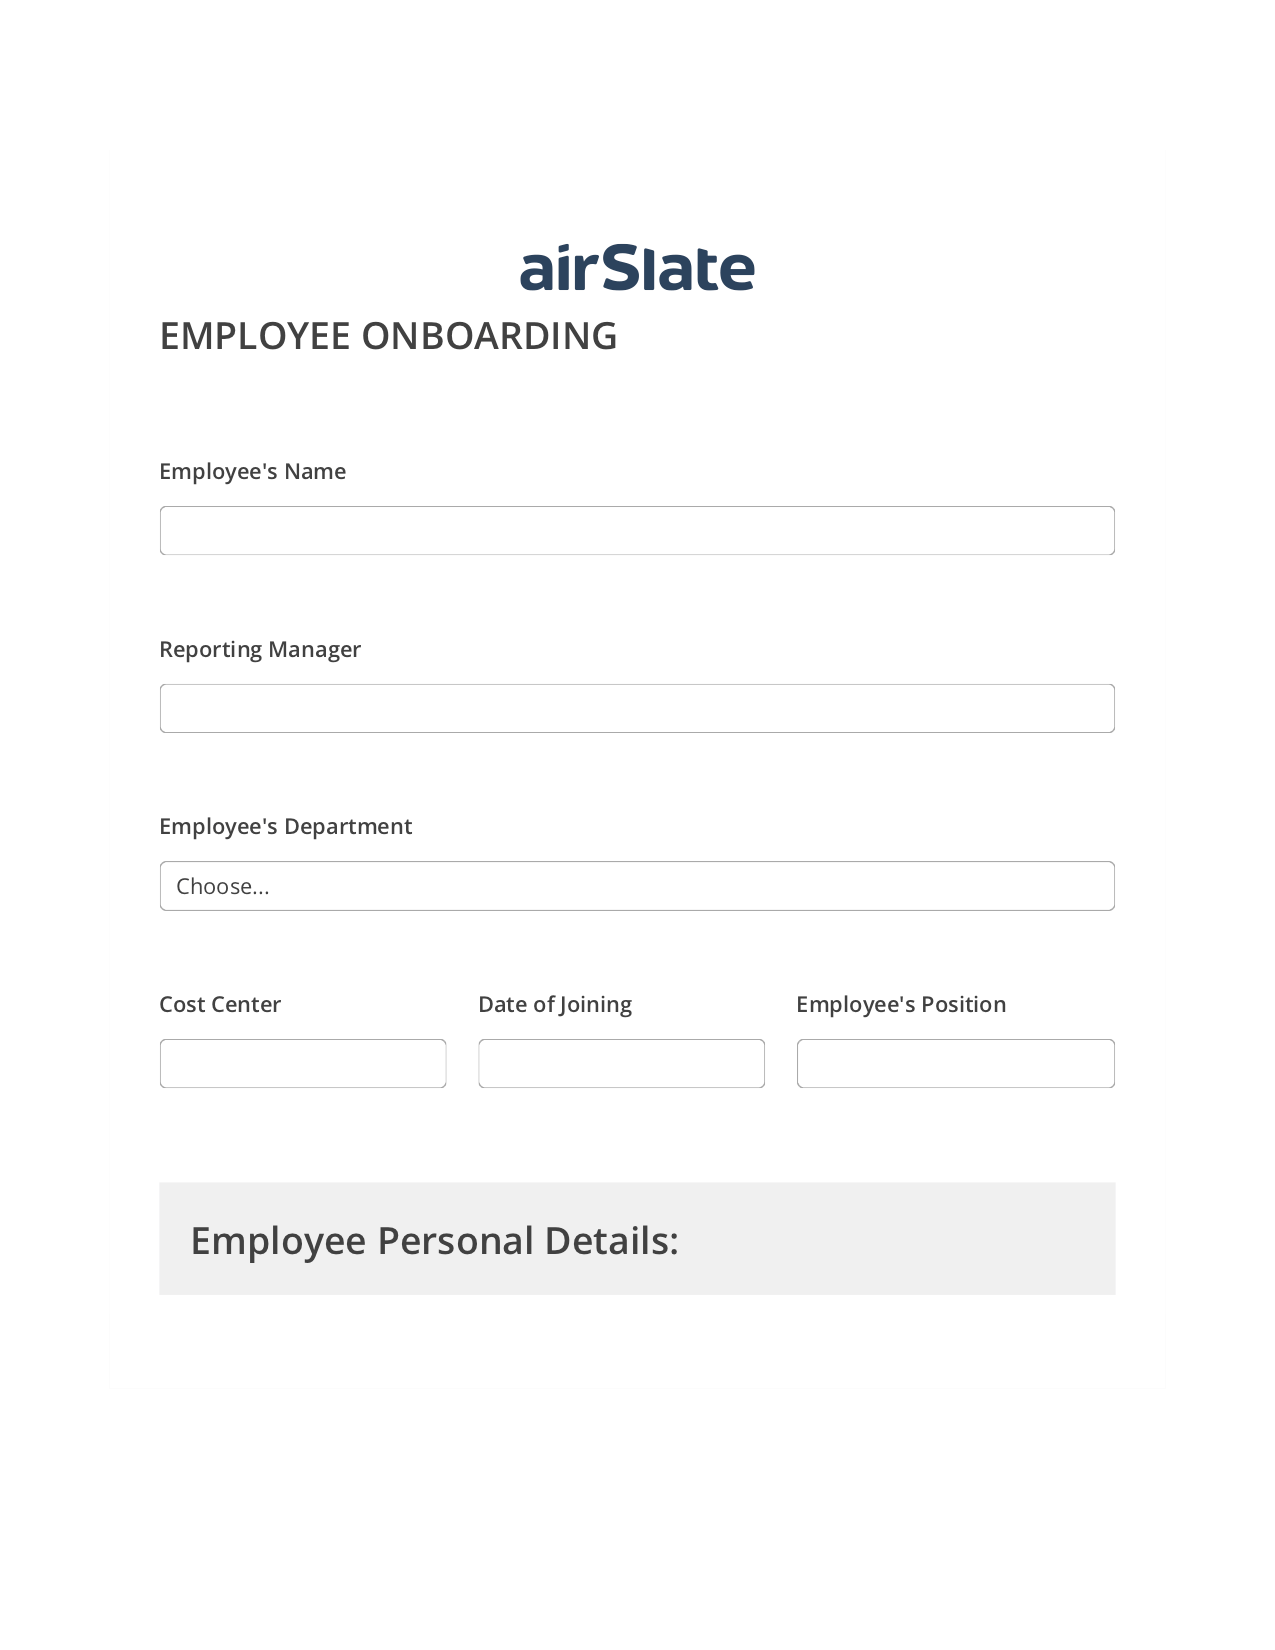 Employee Onboarding Workflow Pre-fill Slate from MS Dynamics 365 record, Create Salesforce Record Bot, Archive to SharePoint Folder Bot